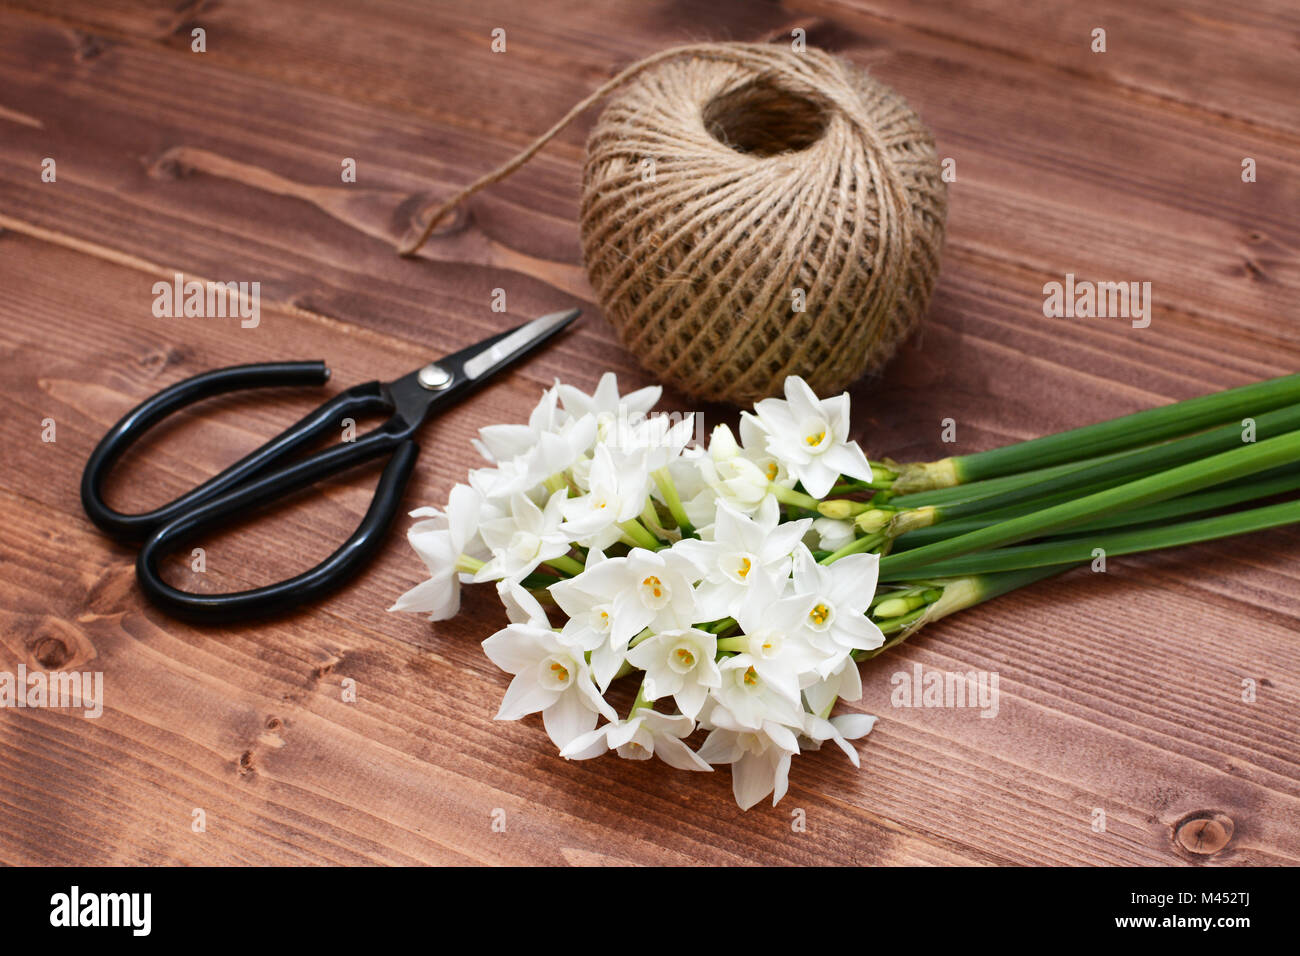 Old-fashioned florist scissors with a bunch of white narcissi and a ball of twine, gathered on a wooden table Stock Photo